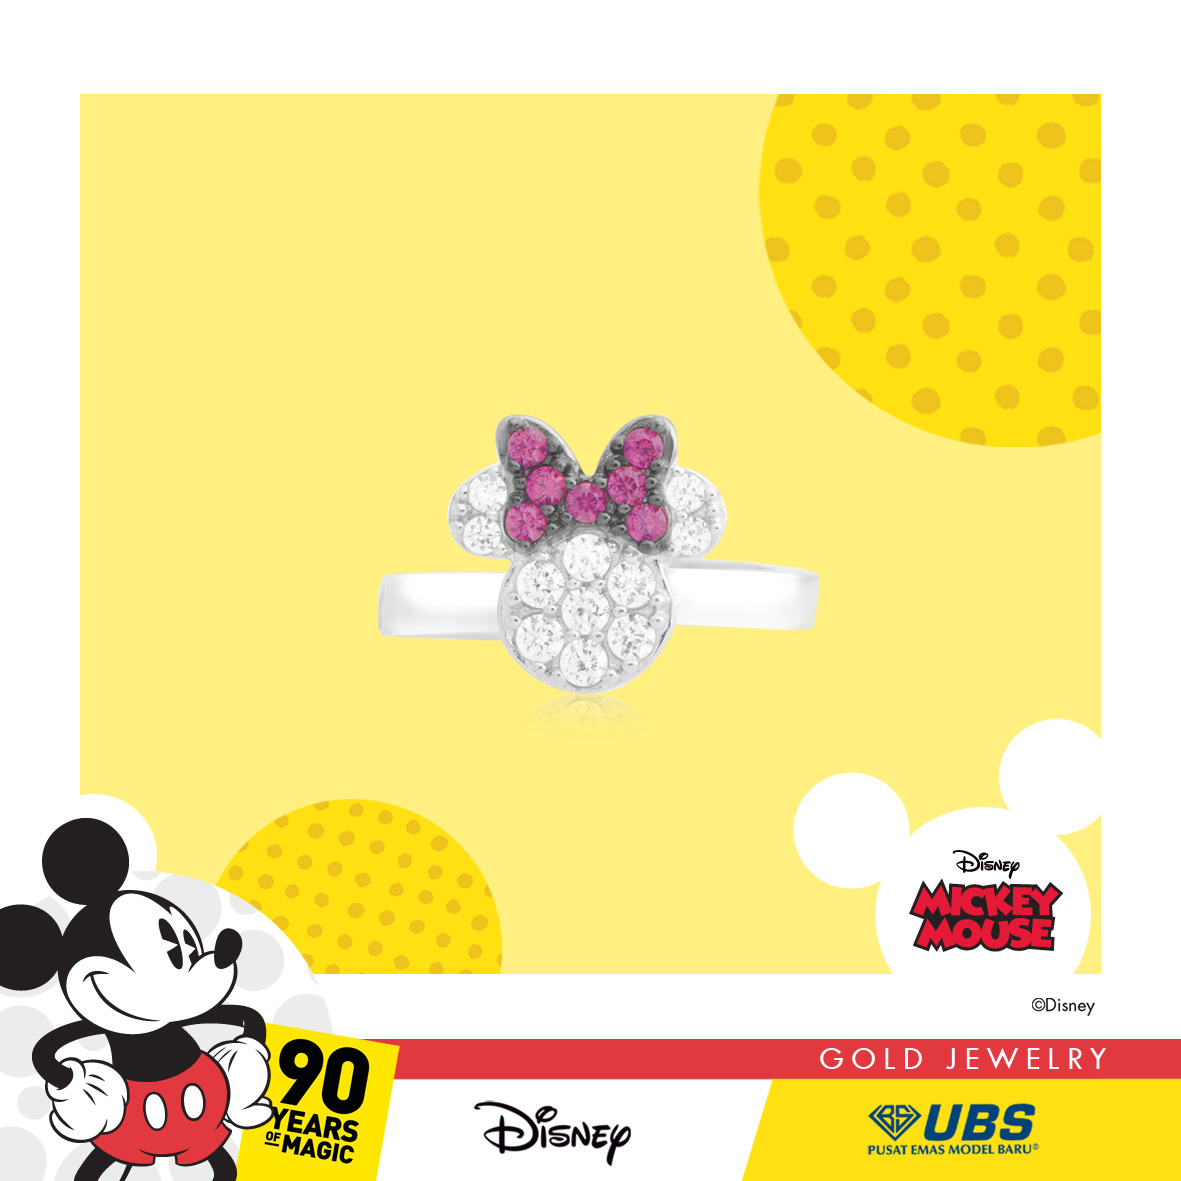 MINNIE MOUSE BABY RING